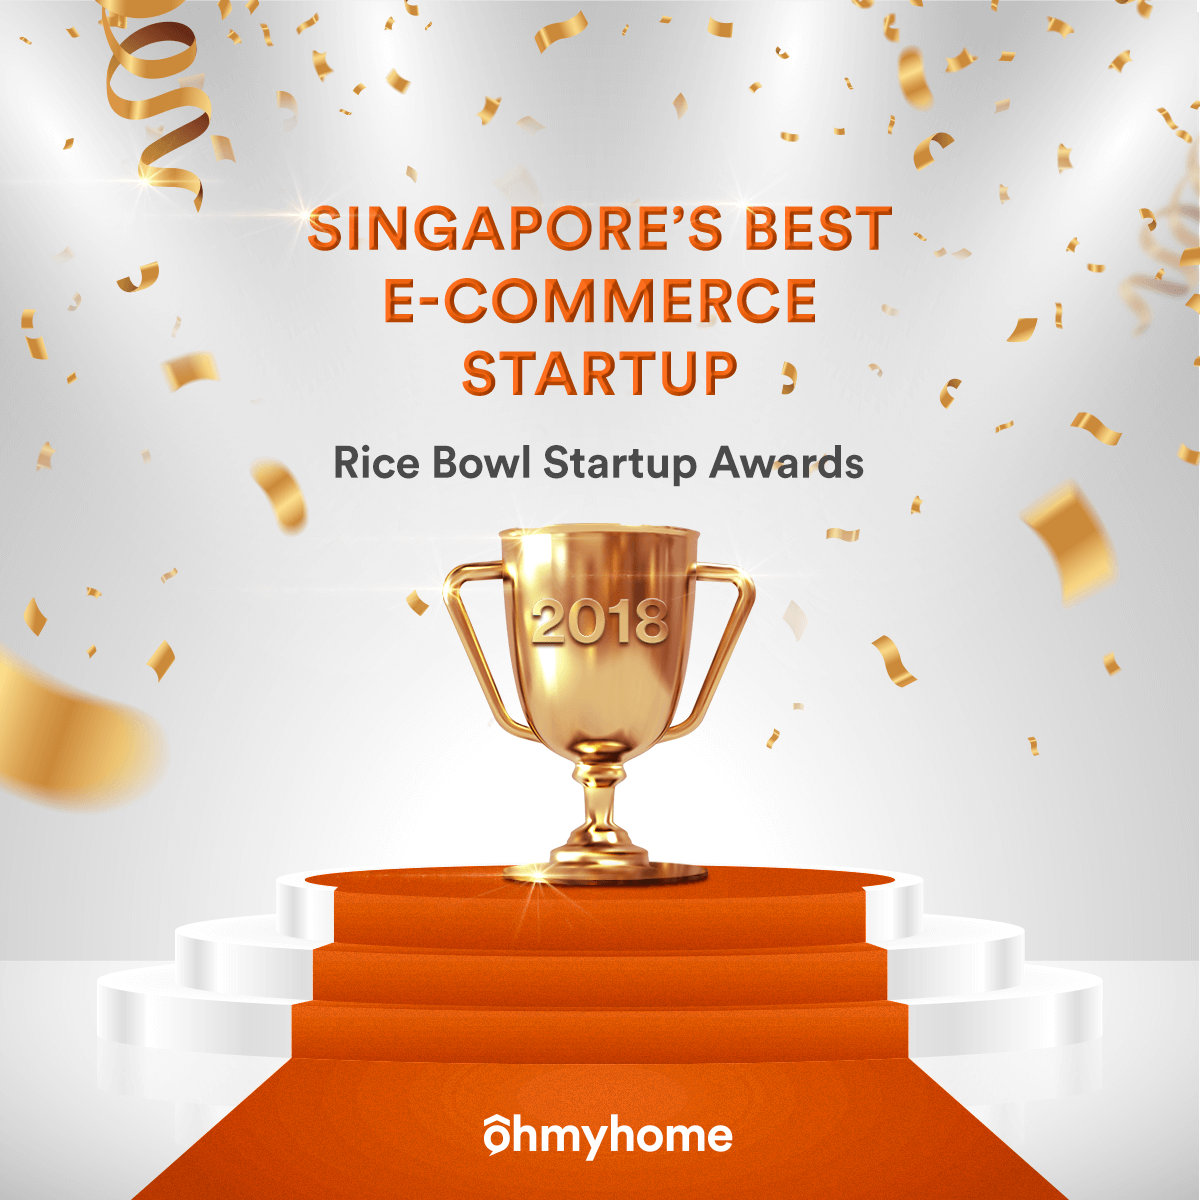 ohmyhome-buy-sell-rent-property-app-singapore-rice-bowl-2018-award